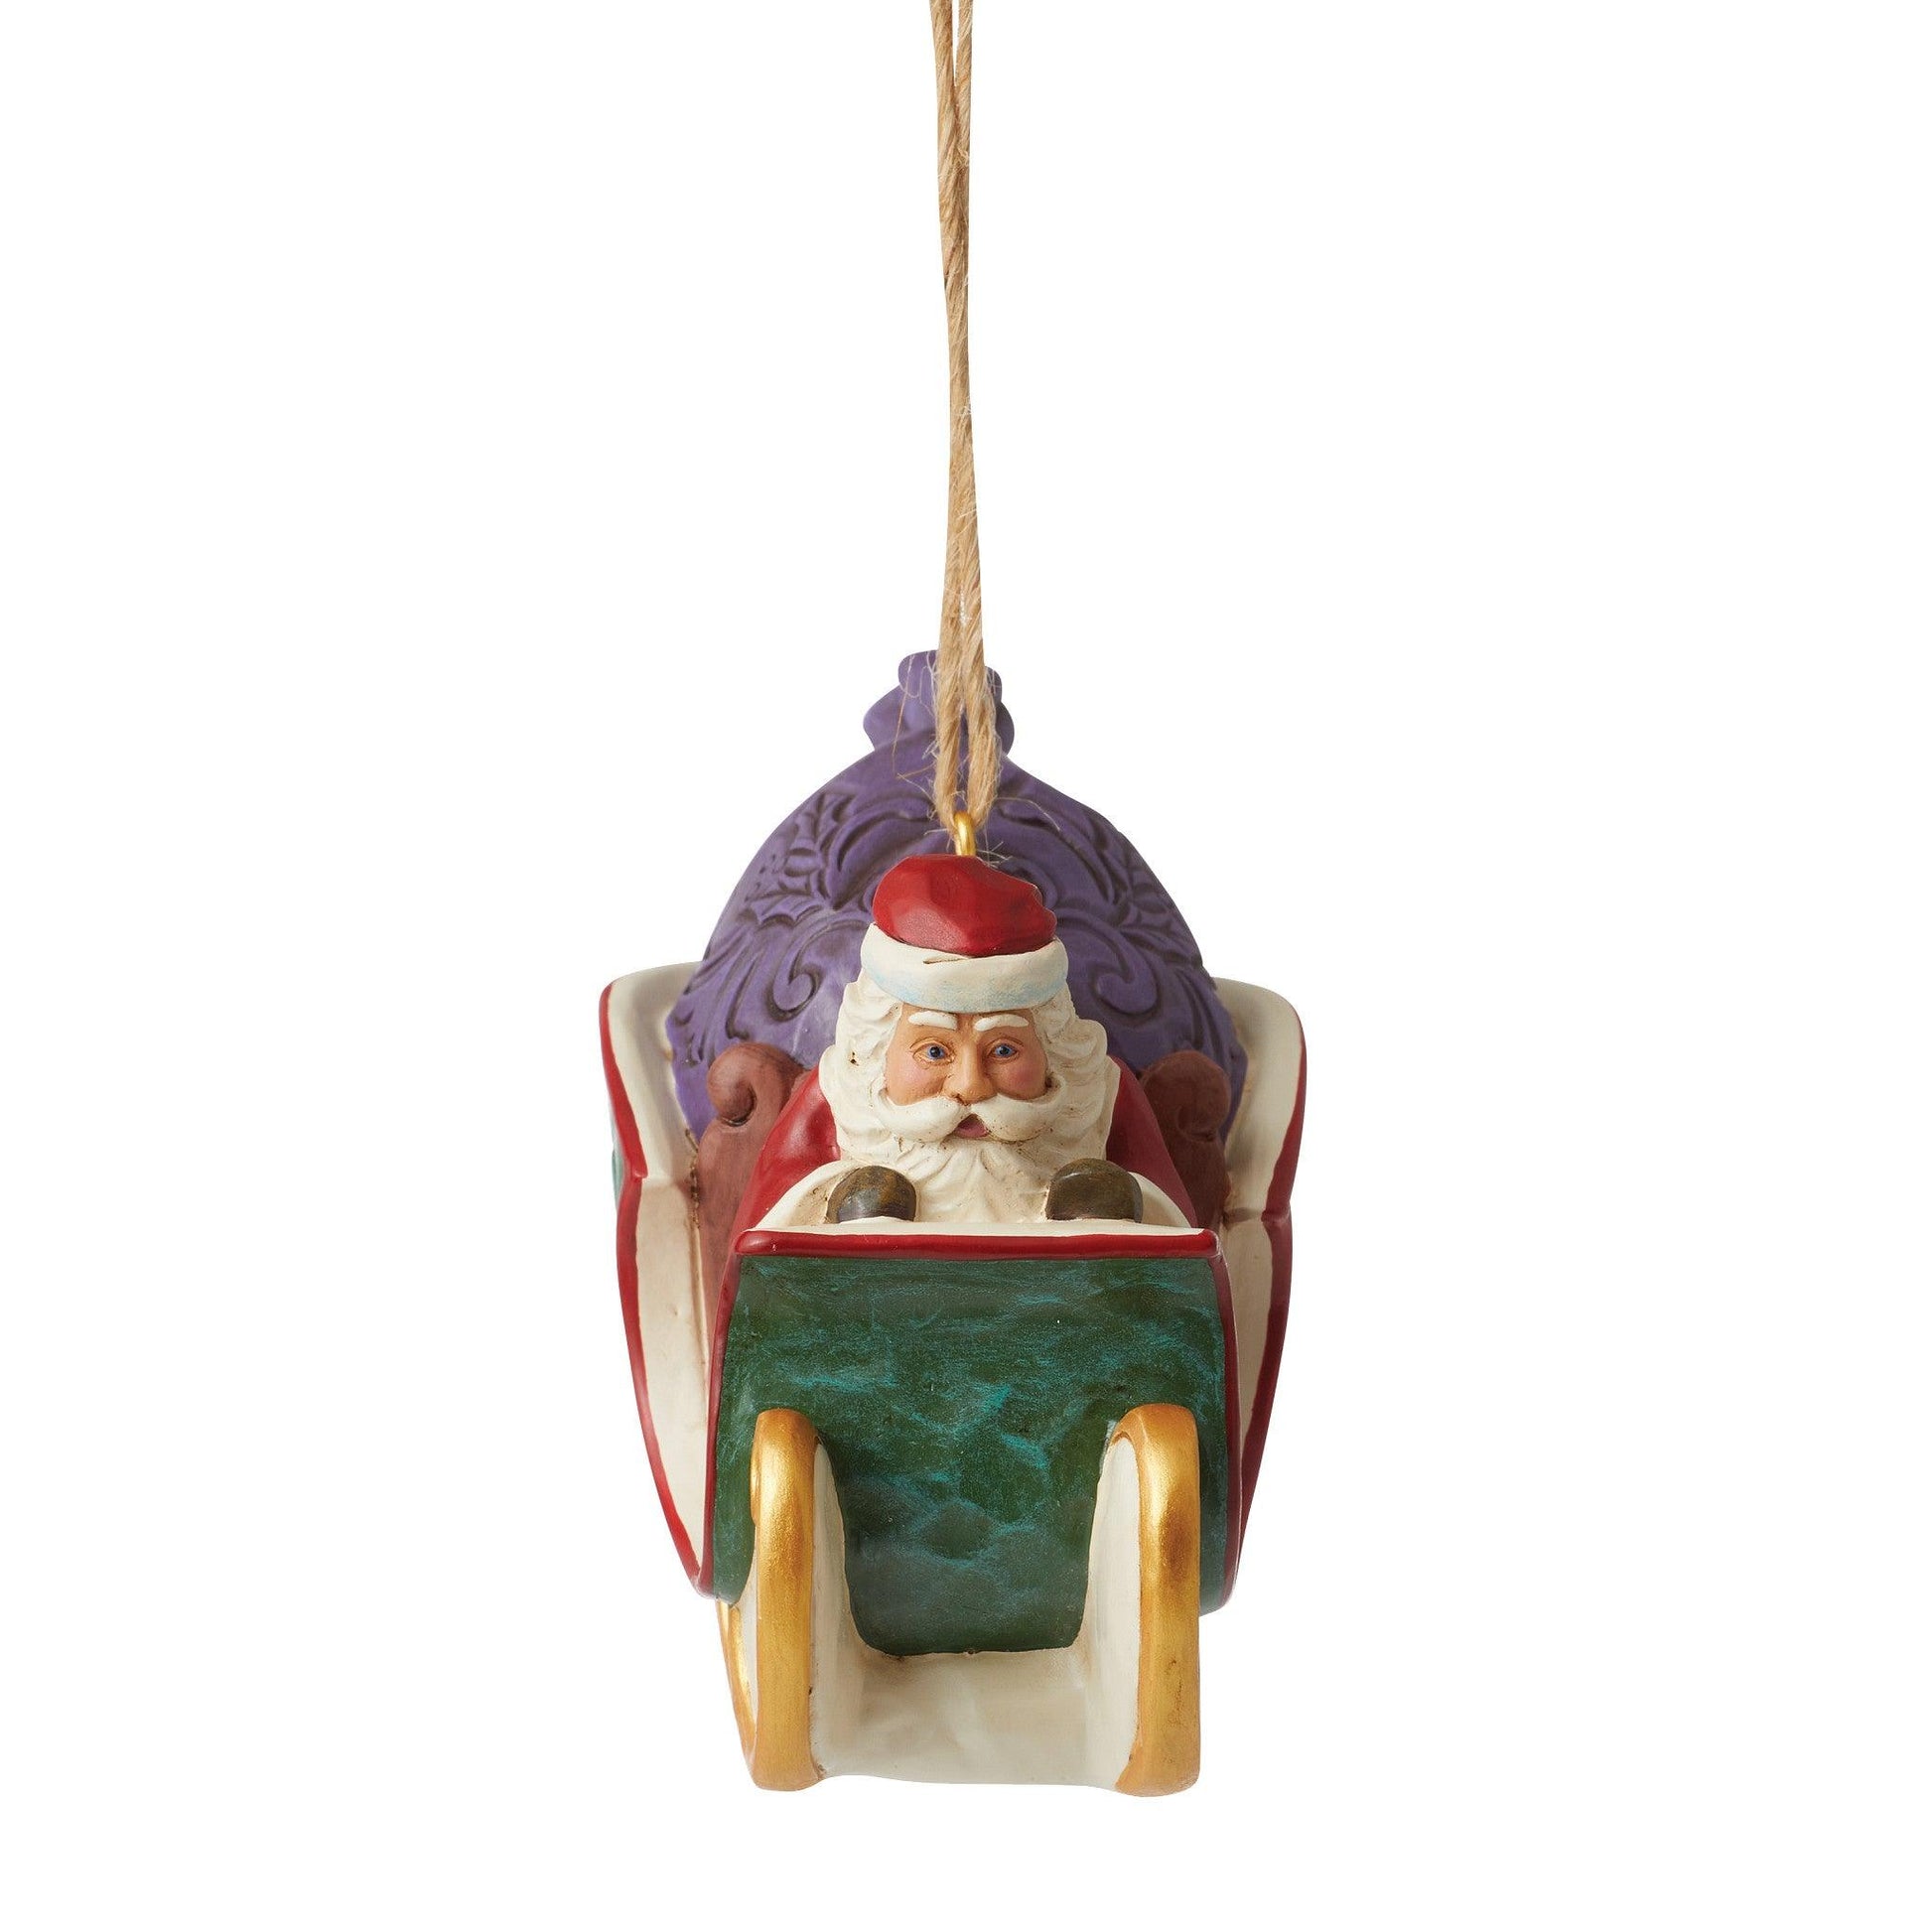 Twas the Night Before Christmas Santa Sleigh Hanging Ornament - Gallery Gifts Online 